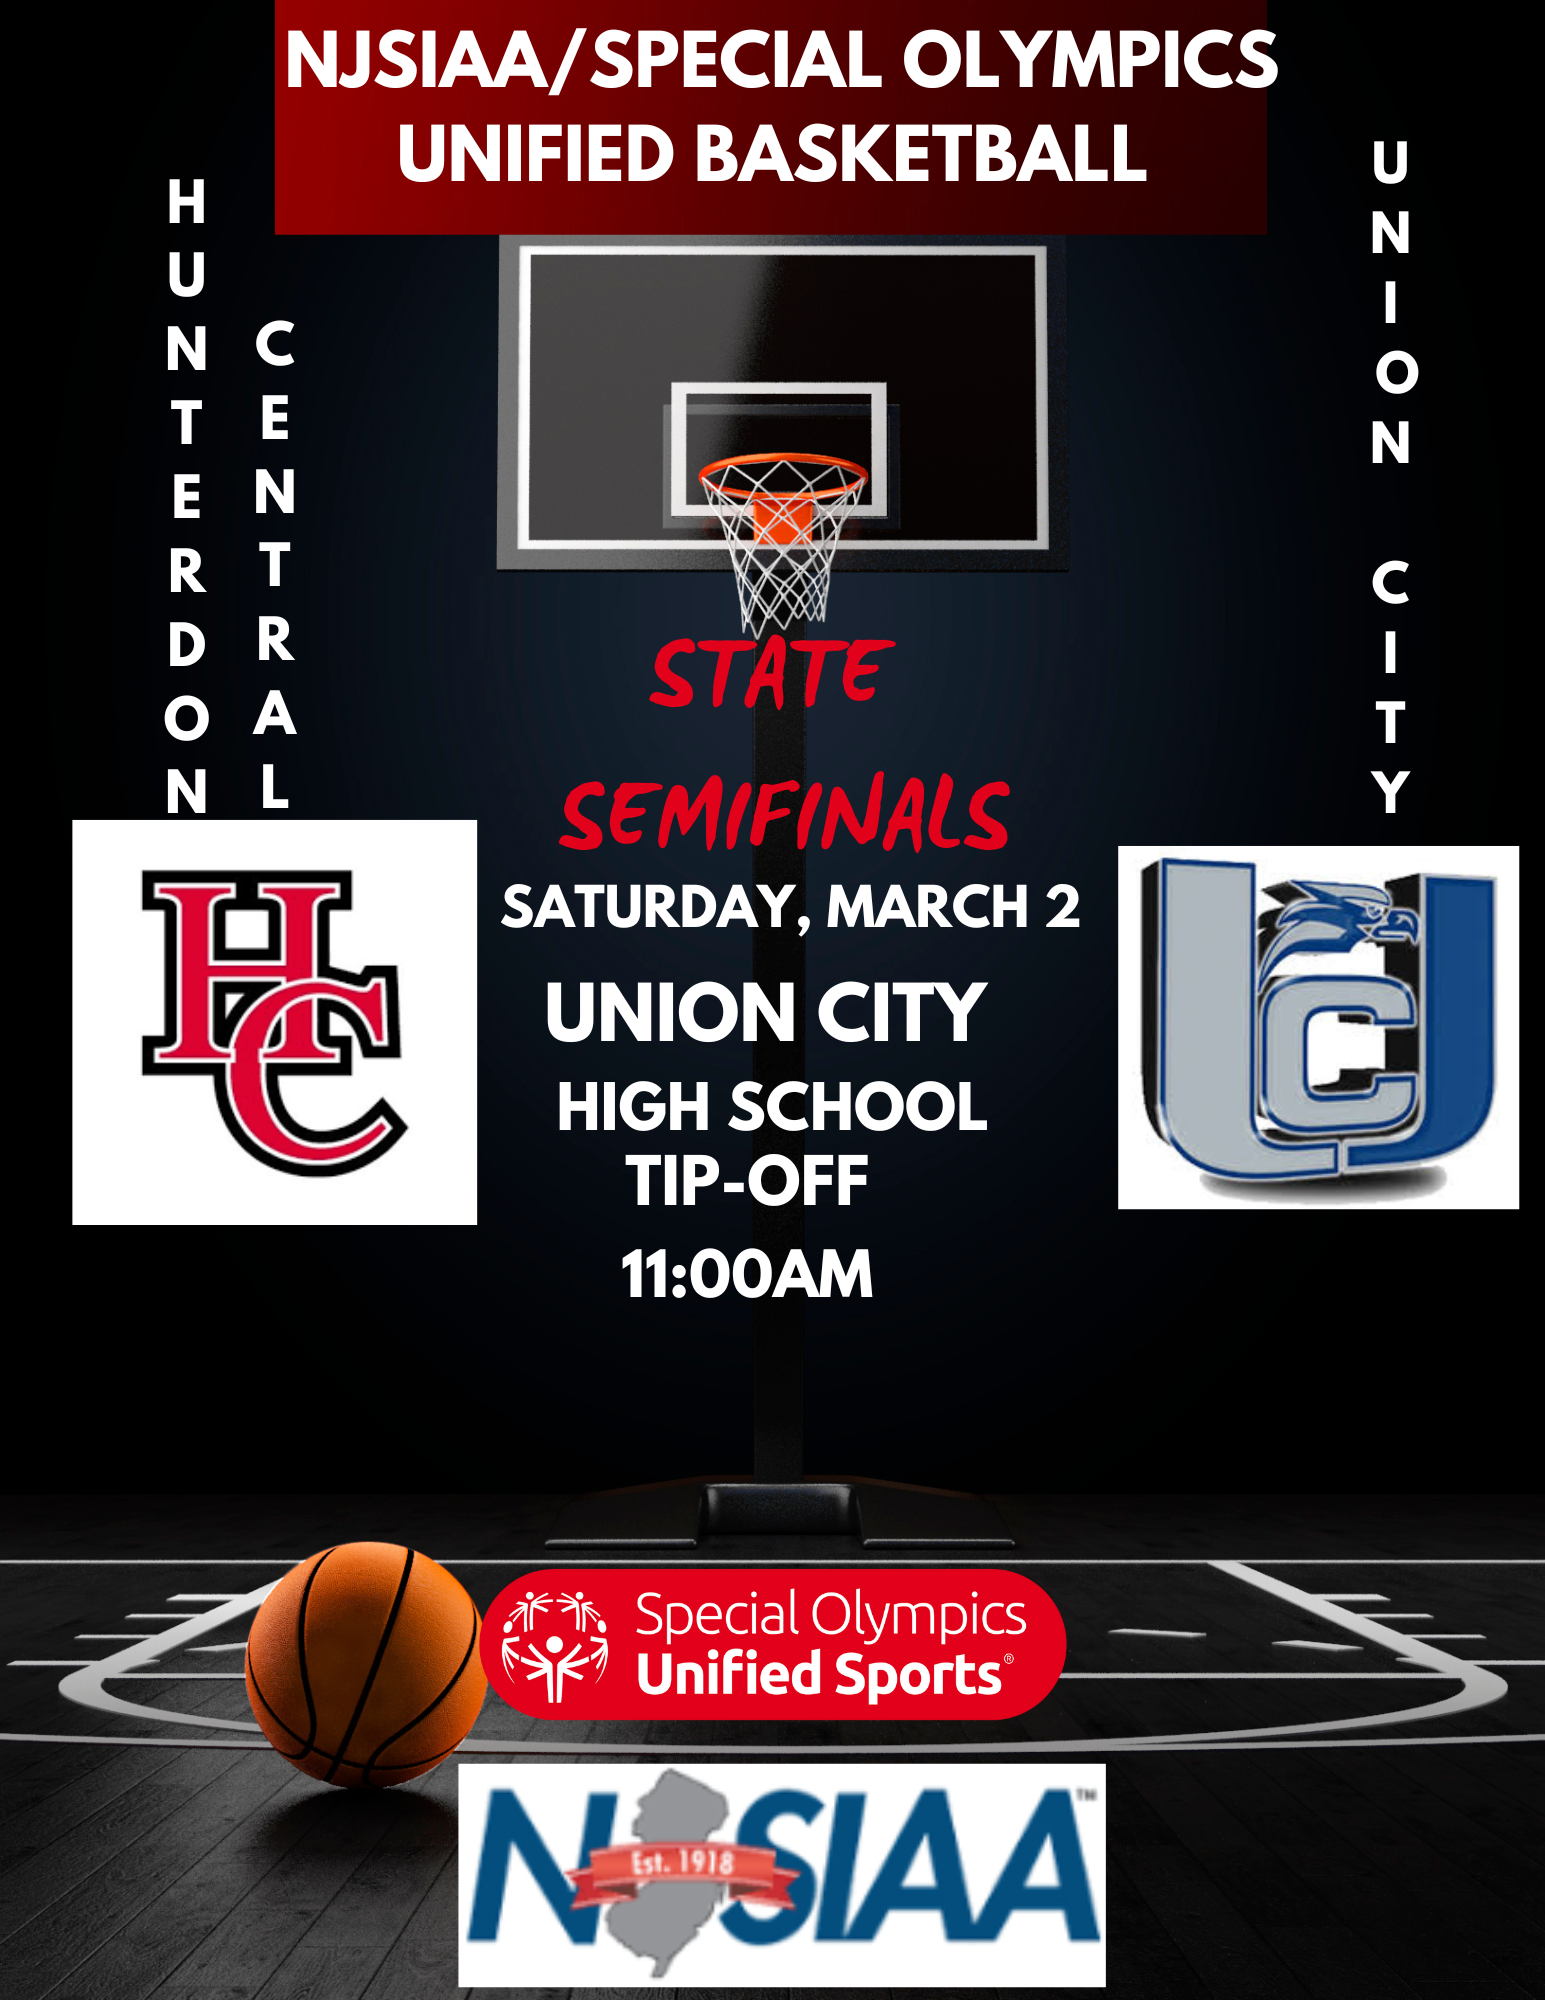 The NJSIAA/Special Olympics Unified Basketball State Semi-Final Flyer